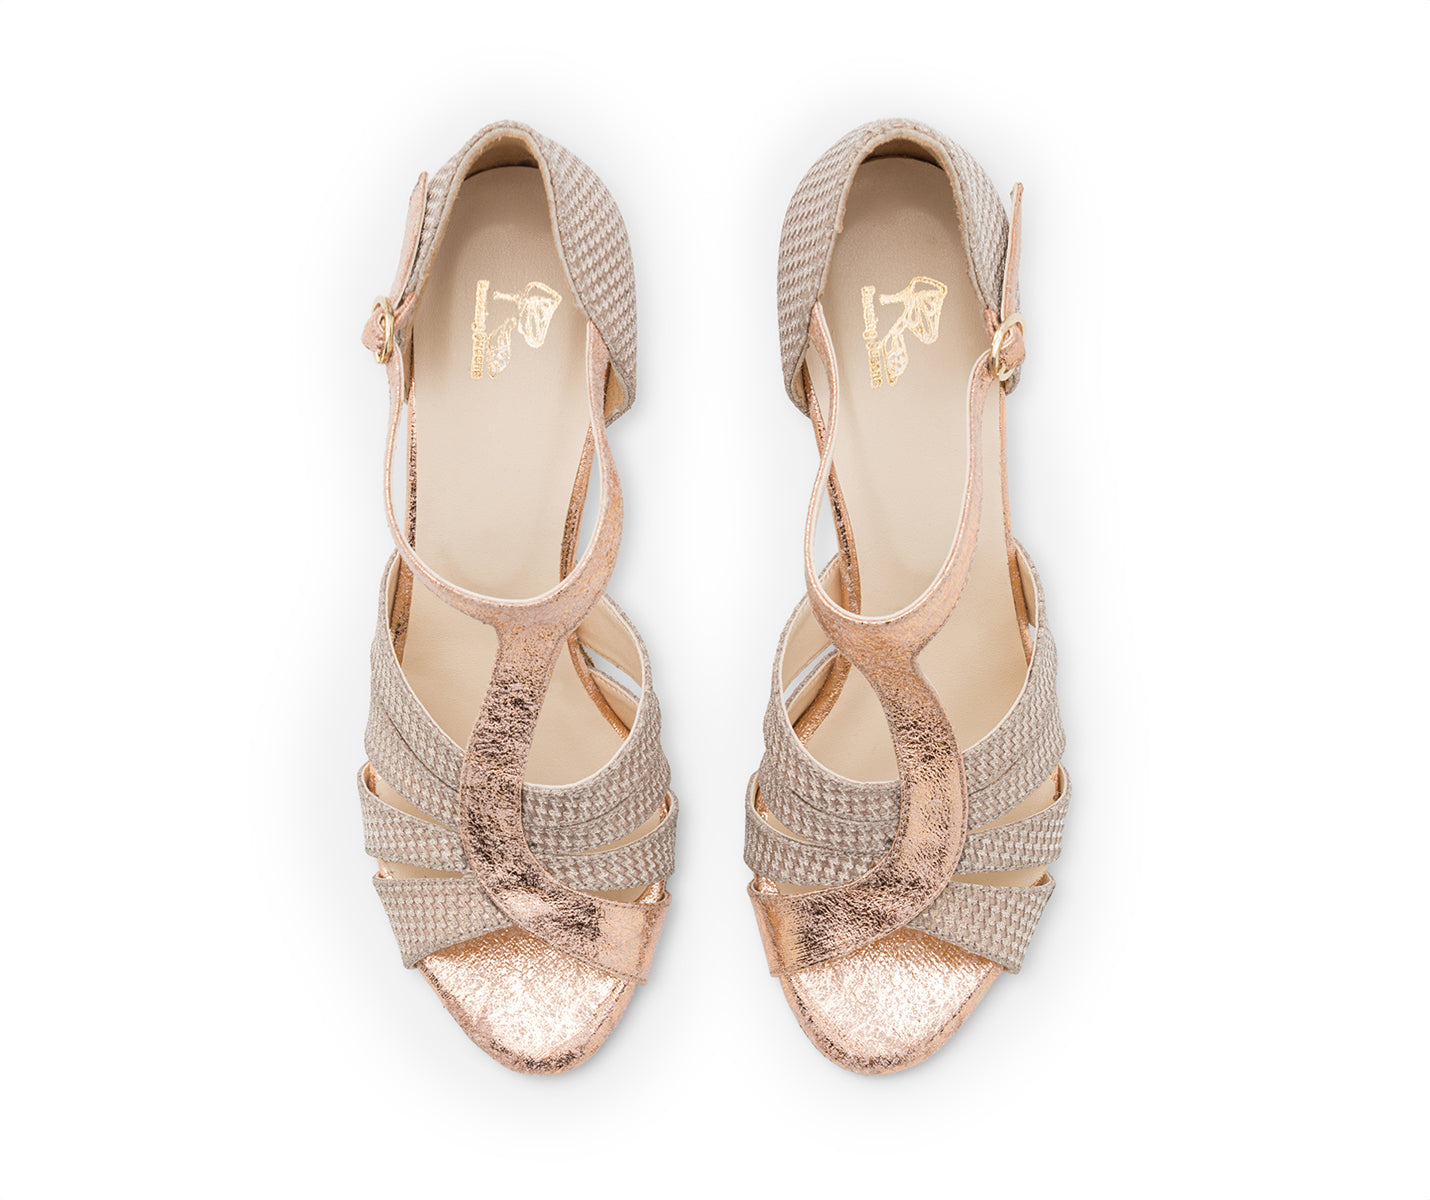 ESP09 dance shoes in rose gold